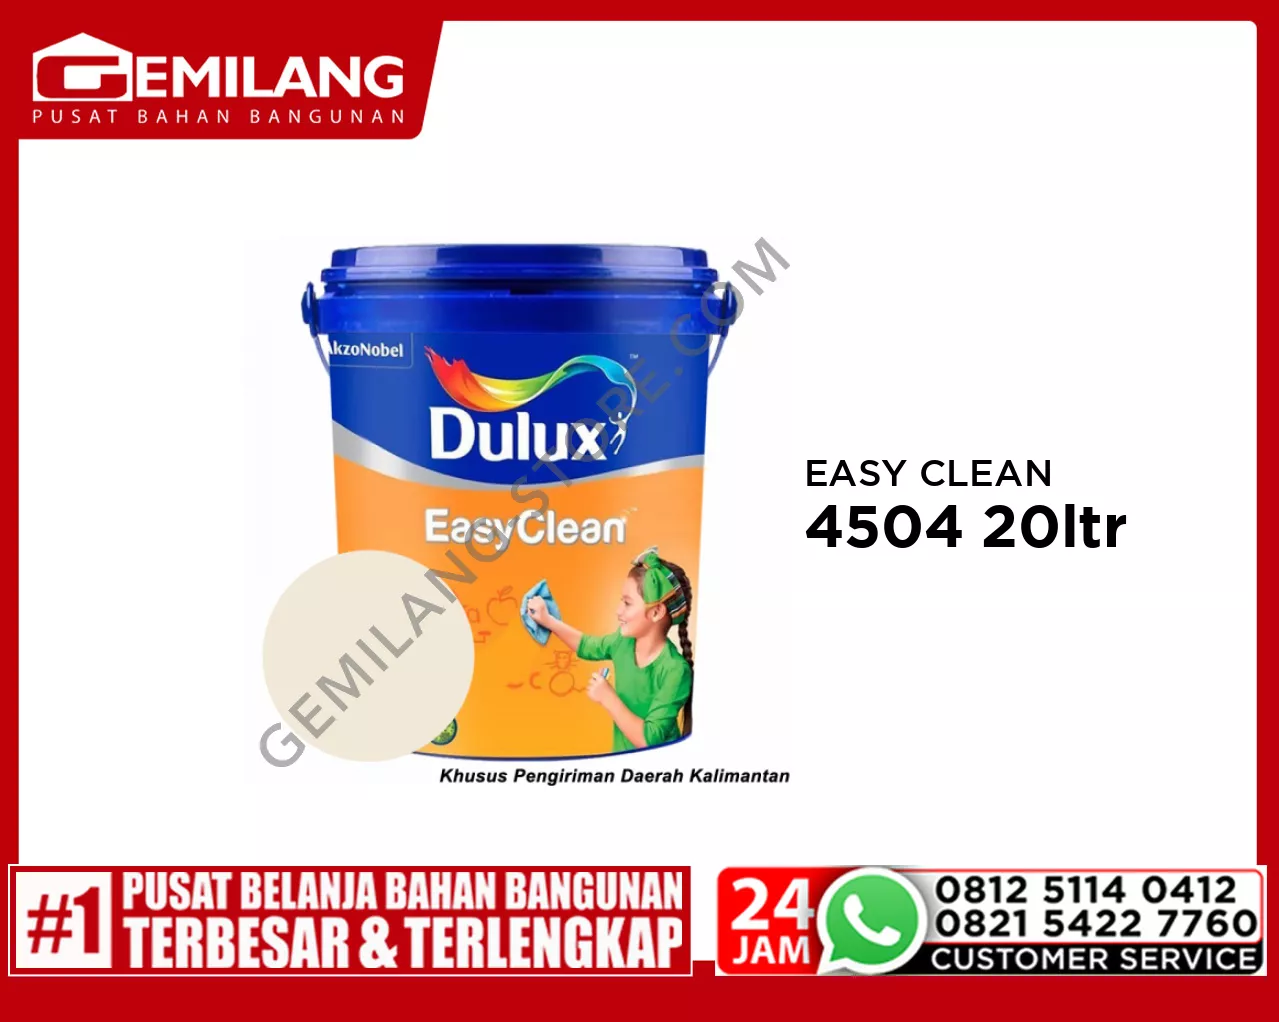 DULUX EASY CLEAN SUNDROP WHITE 44504 20ltr